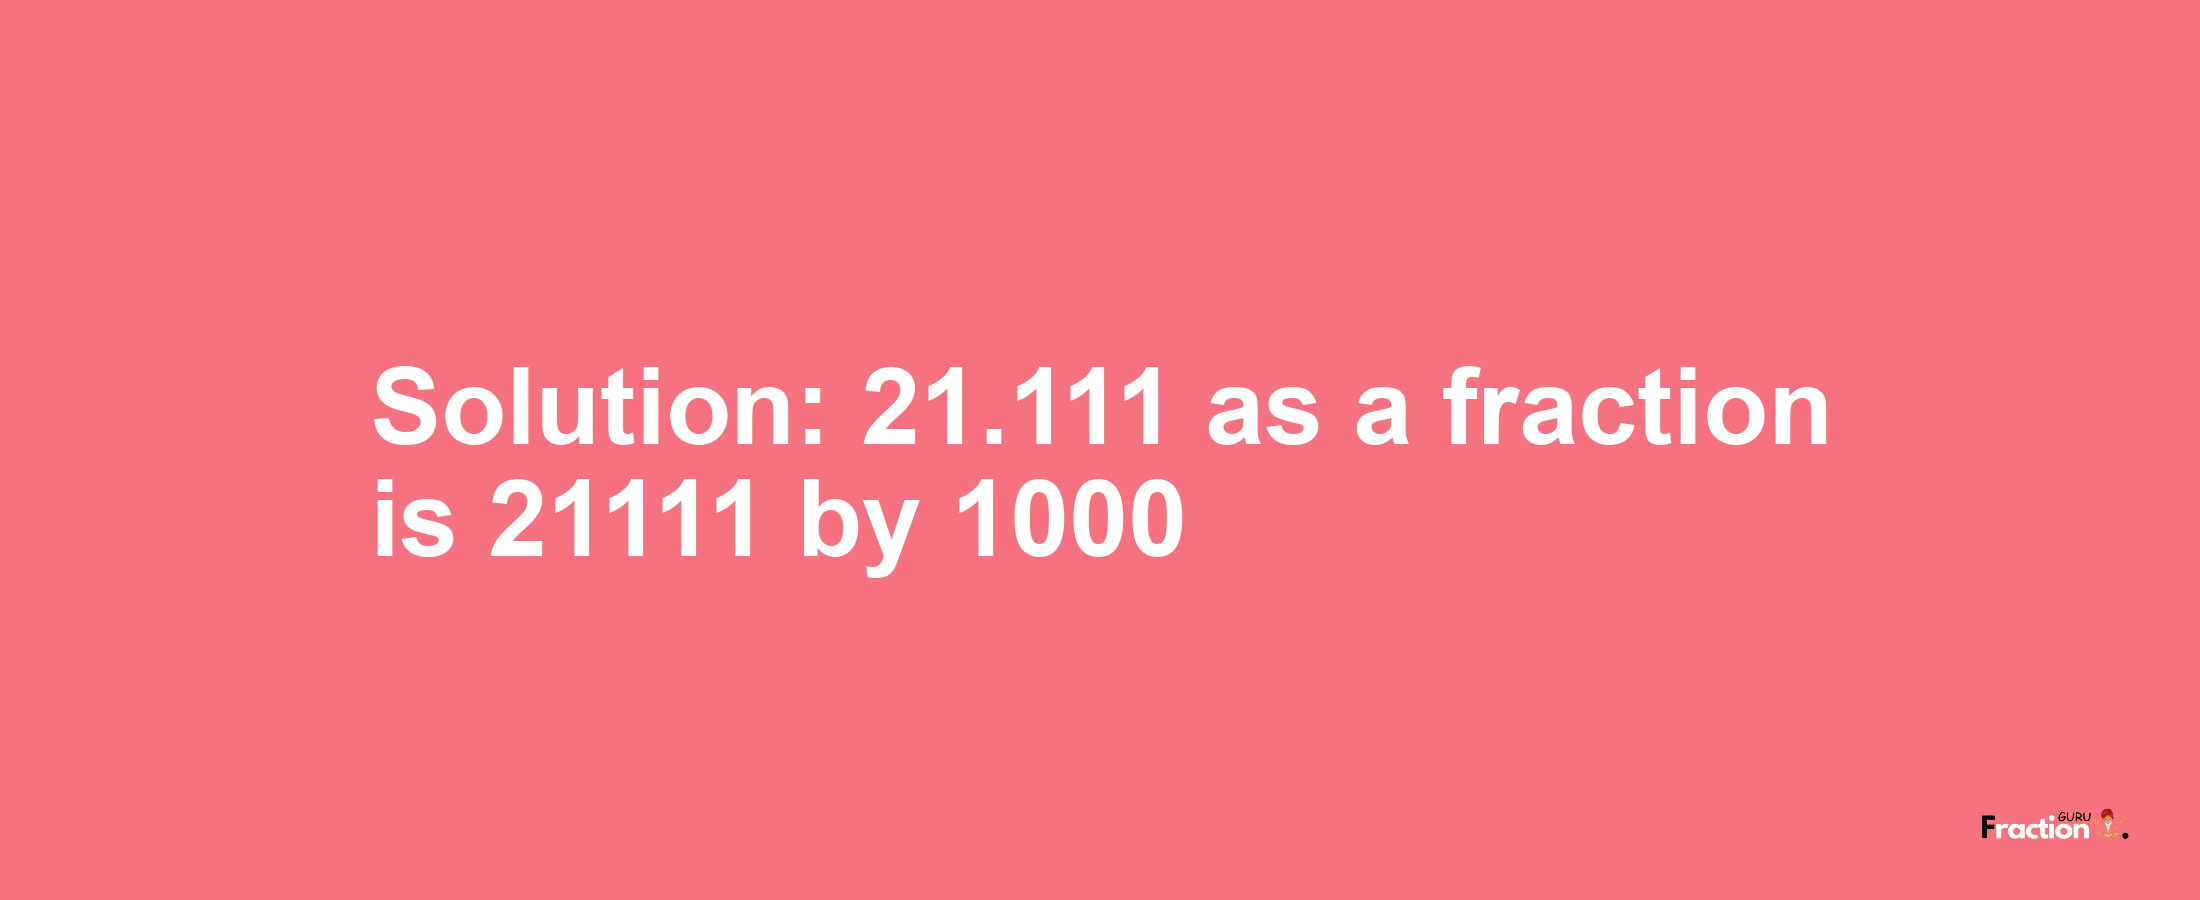 Solution:21.111 as a fraction is 21111/1000